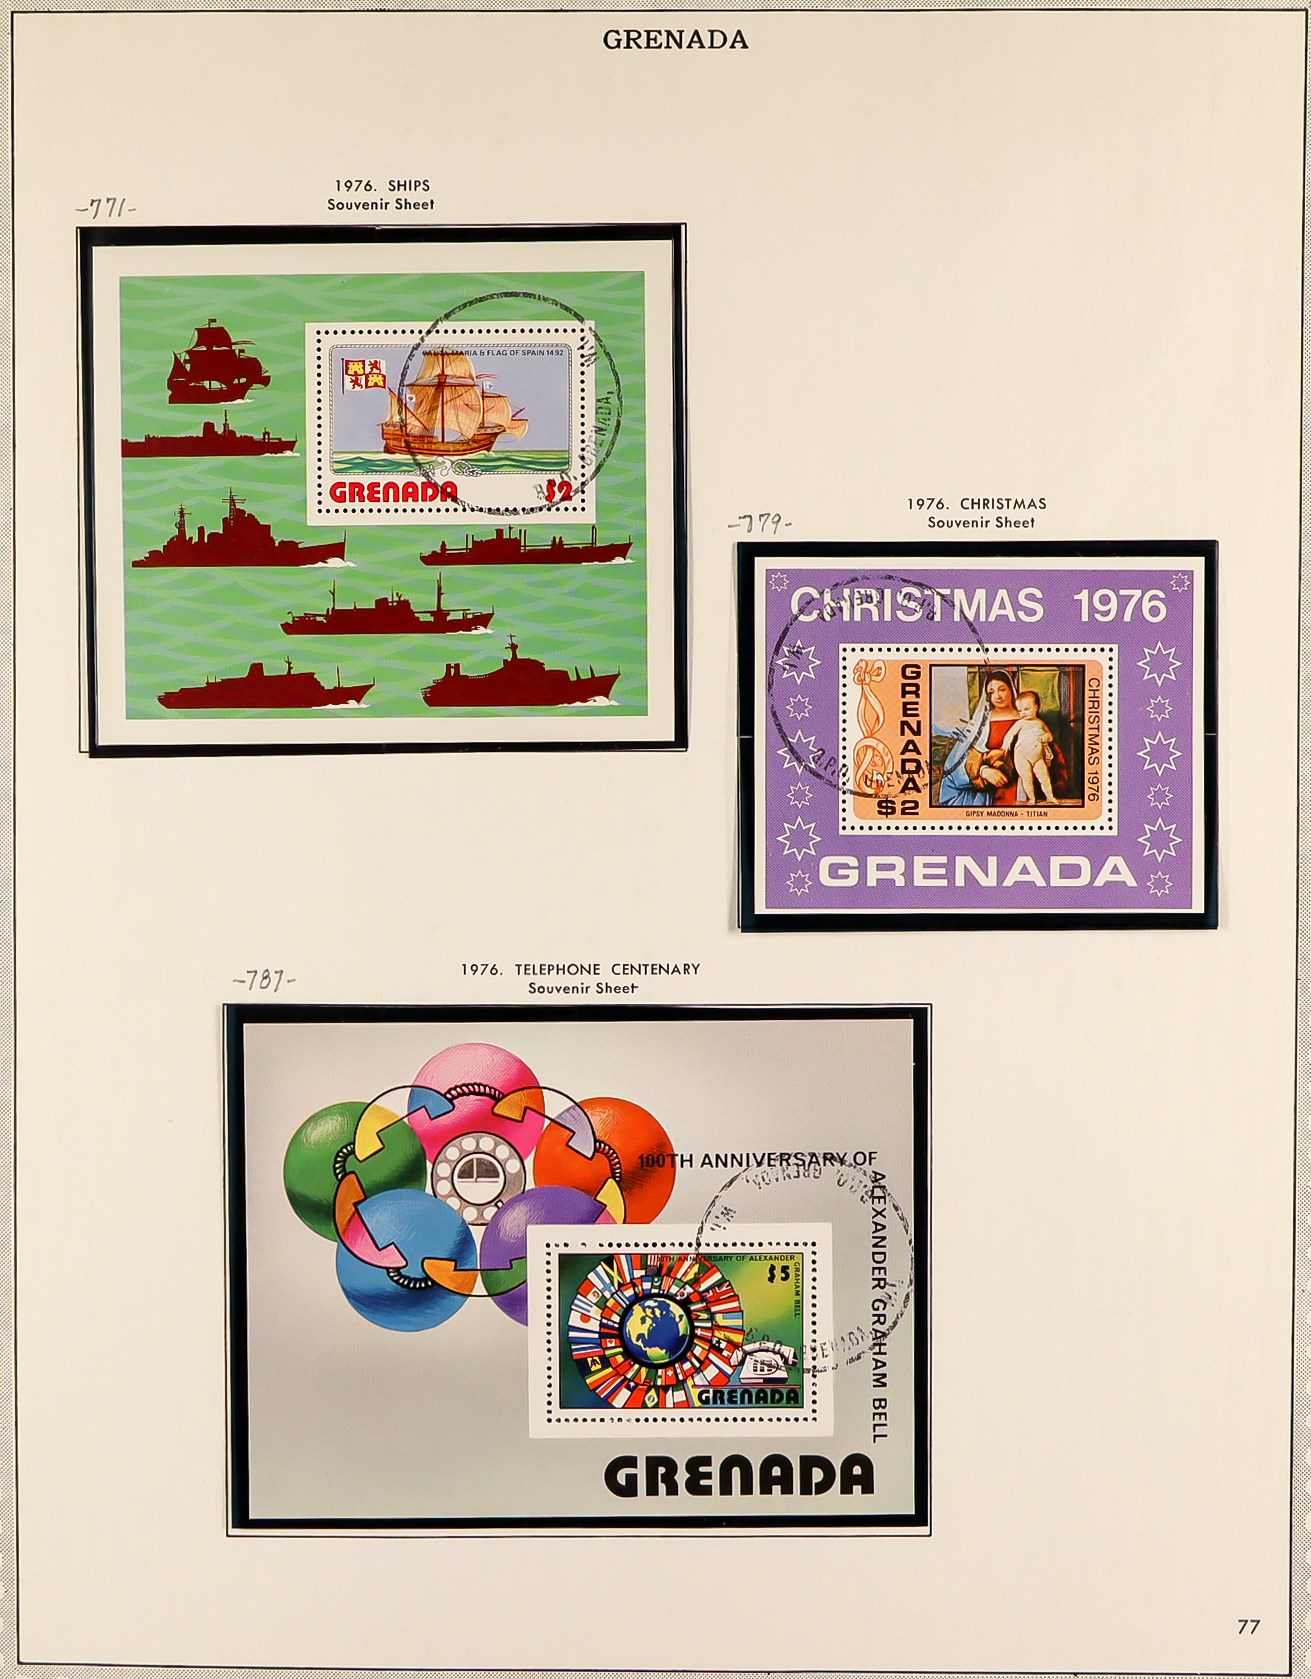 GRENADA 1953 - 1983 COLLECTION in album of chiefly never hinged mint sets & miniature sheets, some - Image 7 of 15